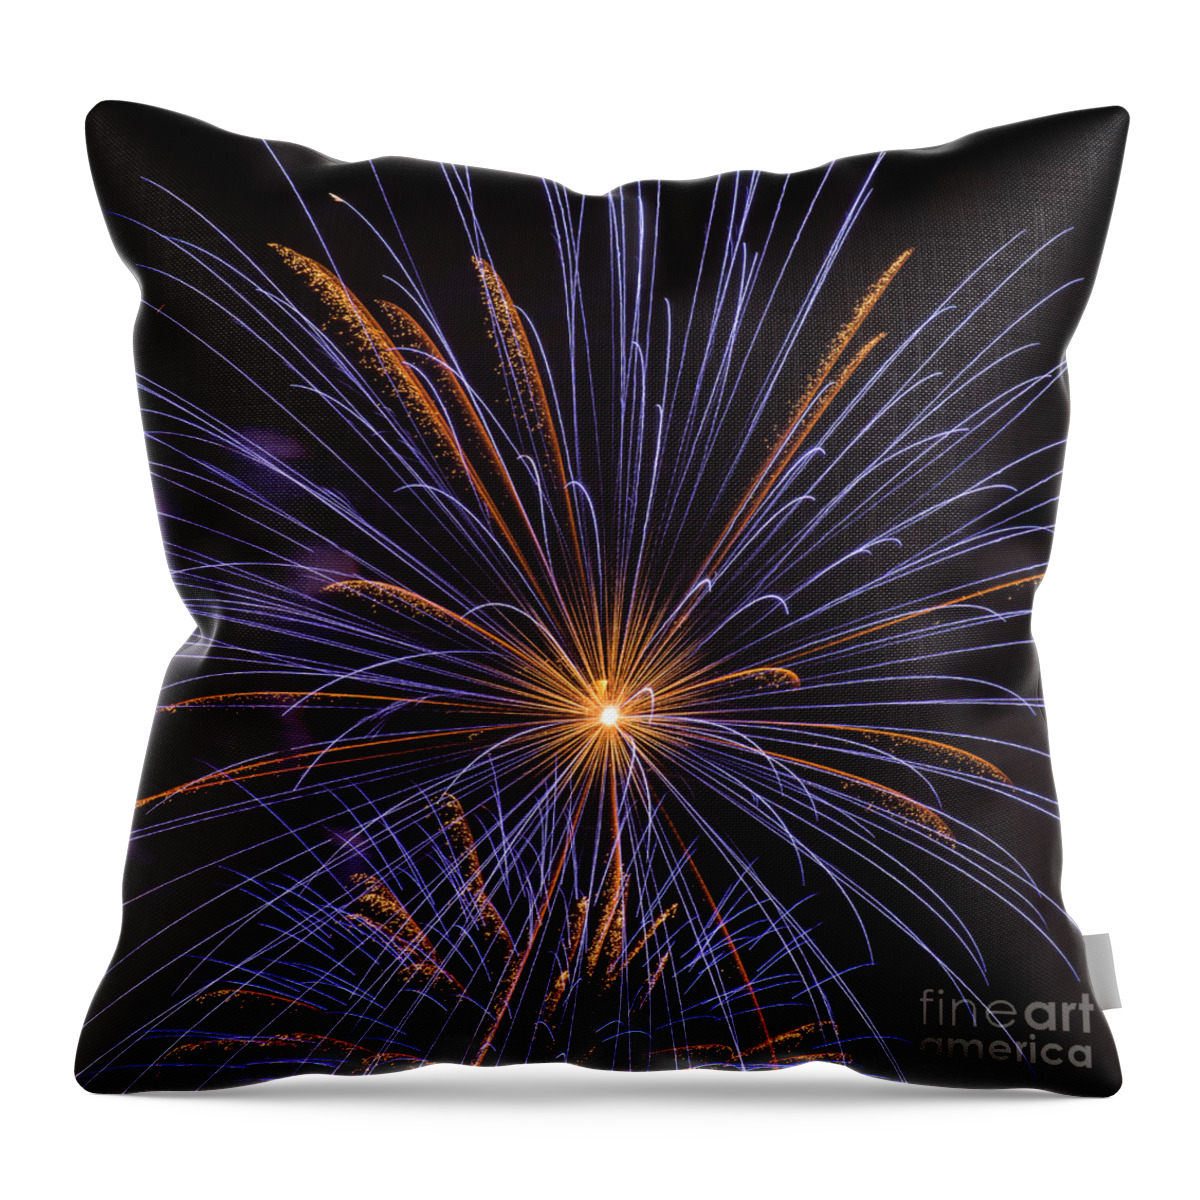 National Day Throw Pillow featuring the photograph National Day by Bruno Santoro